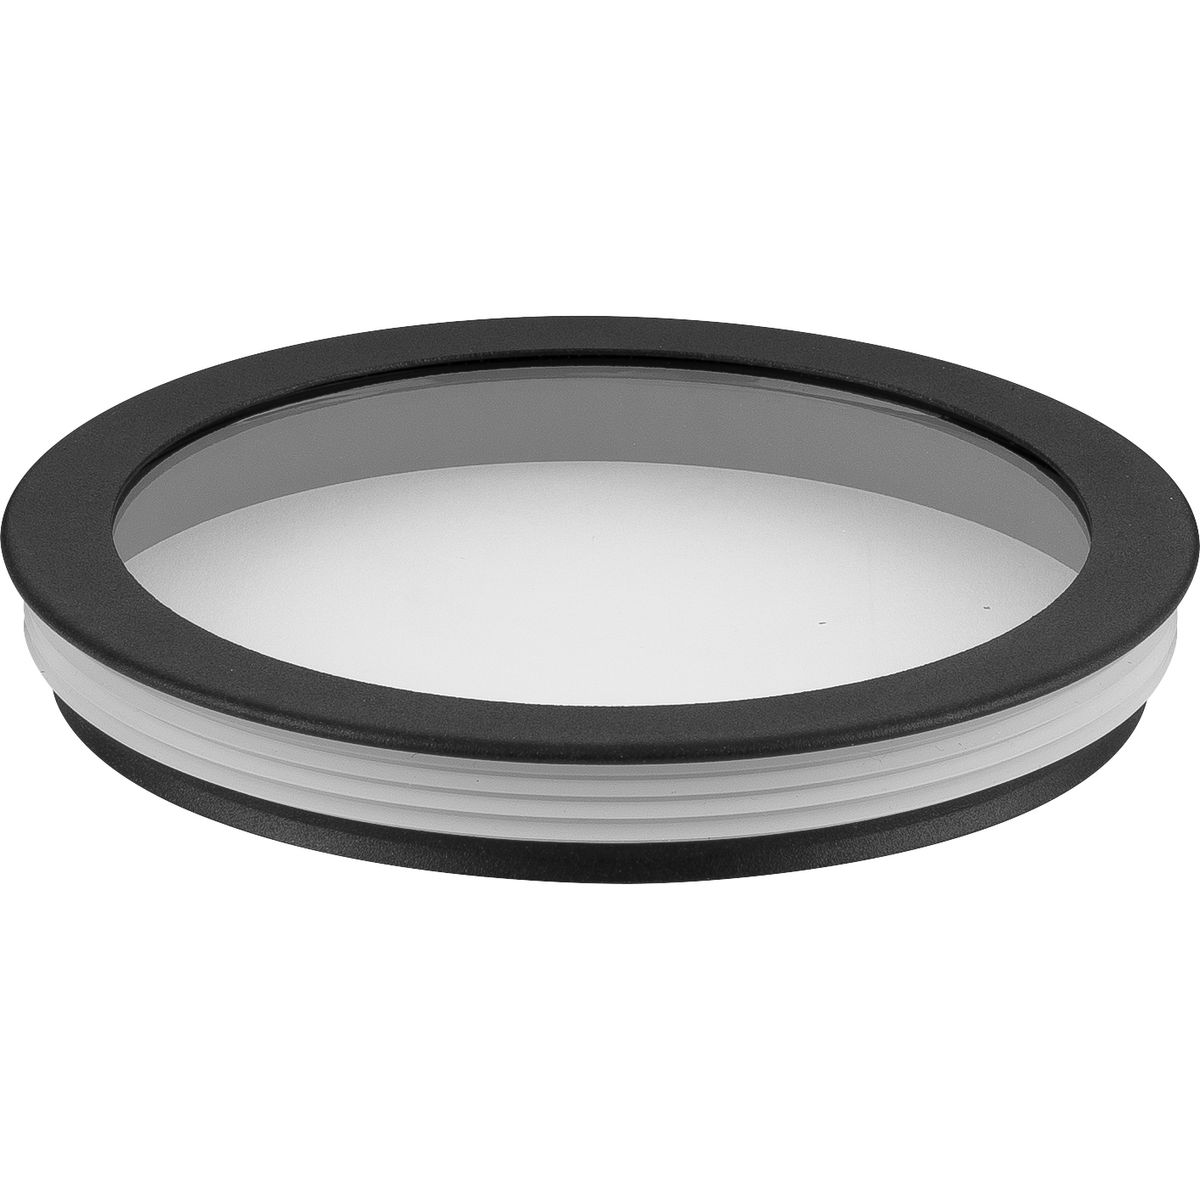 P860046-031 6INCH ROUND CYLINDER COVER